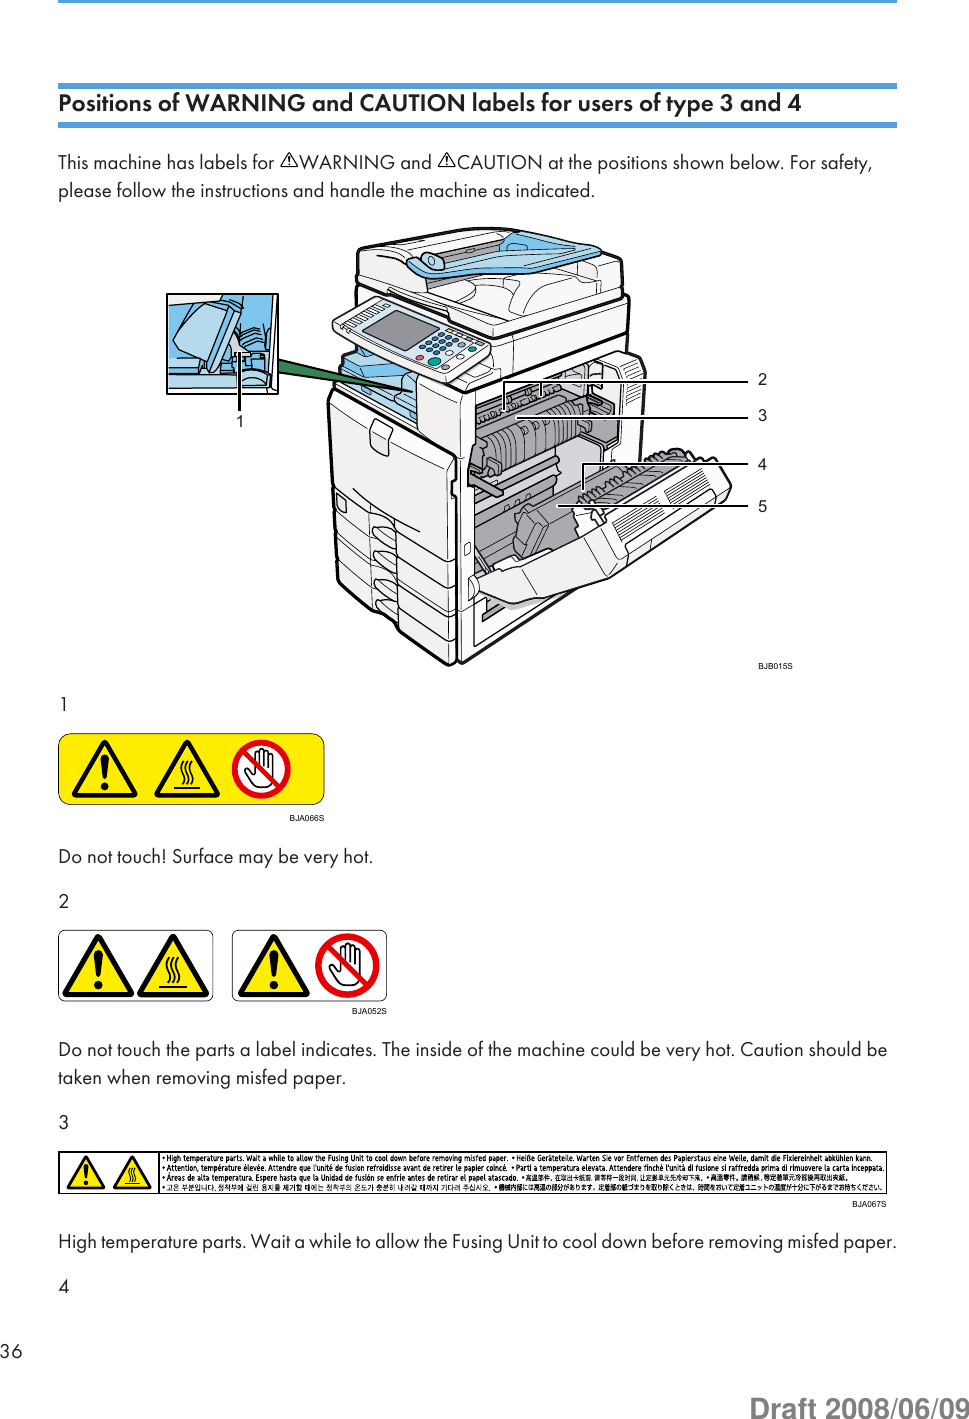 Positions of WARNING and CAUTION labels for users of type 3 and 4This machine has labels for  WARNING and  CAUTION at the positions shown below. For safety,please follow the instructions and handle the machine as indicated.BJB015S321541BJA066SDo not touch! Surface may be very hot.2BJA052SDo not touch the parts a label indicates. The inside of the machine could be very hot. Caution should betaken when removing misfed paper.3BJA067SHigh temperature parts. Wait a while to allow the Fusing Unit to cool down before removing misfed paper.436Draft 2008/06/09